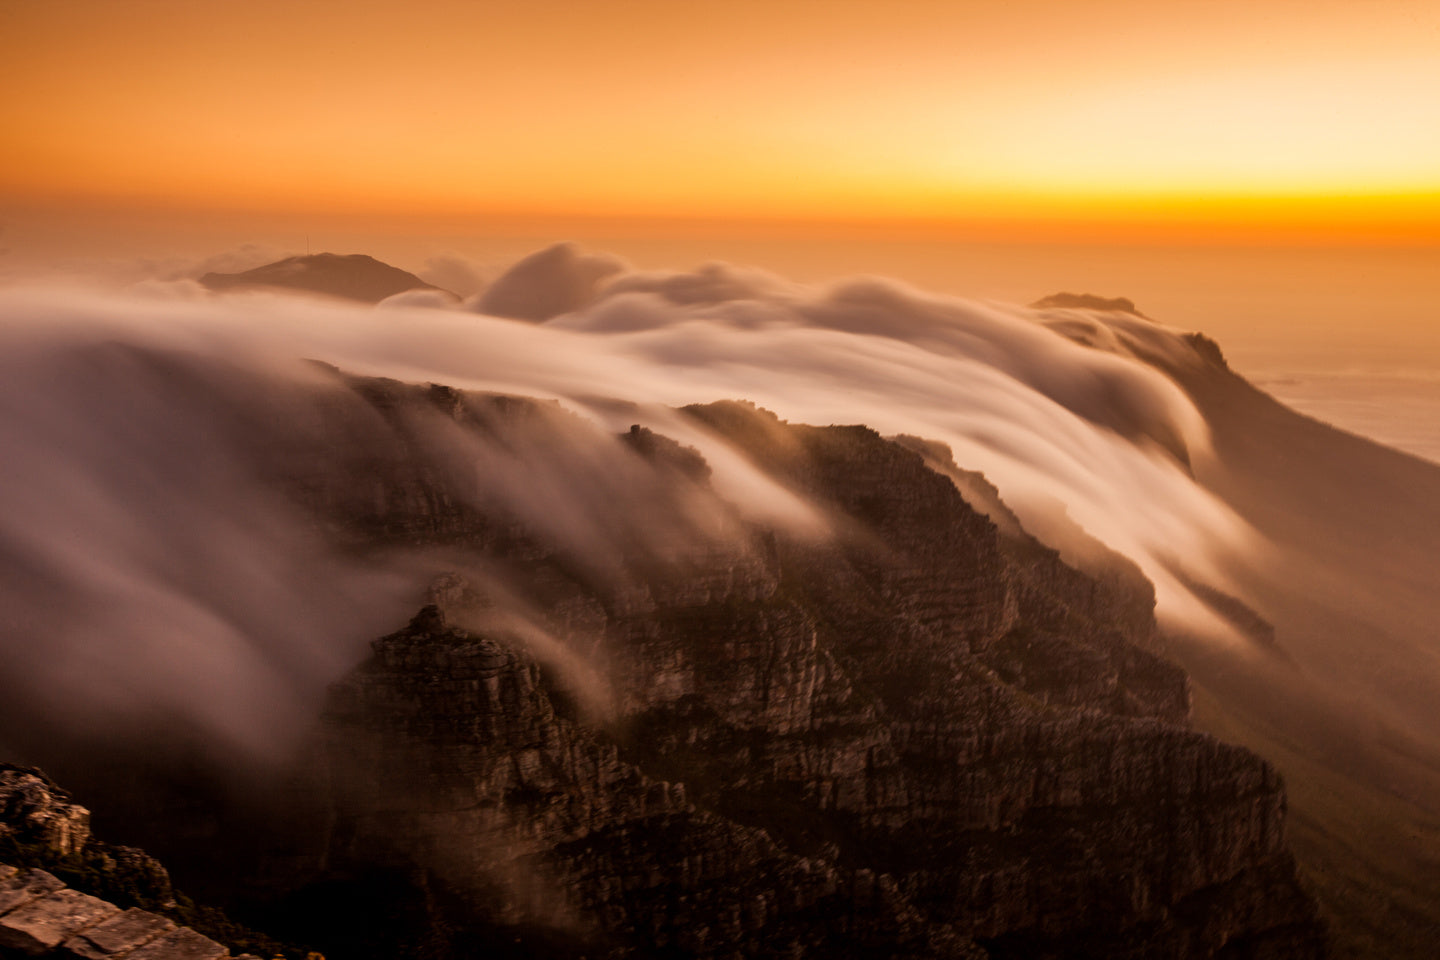 Over the Clouds in Cape Town, South Africa - Exotic Landscapes